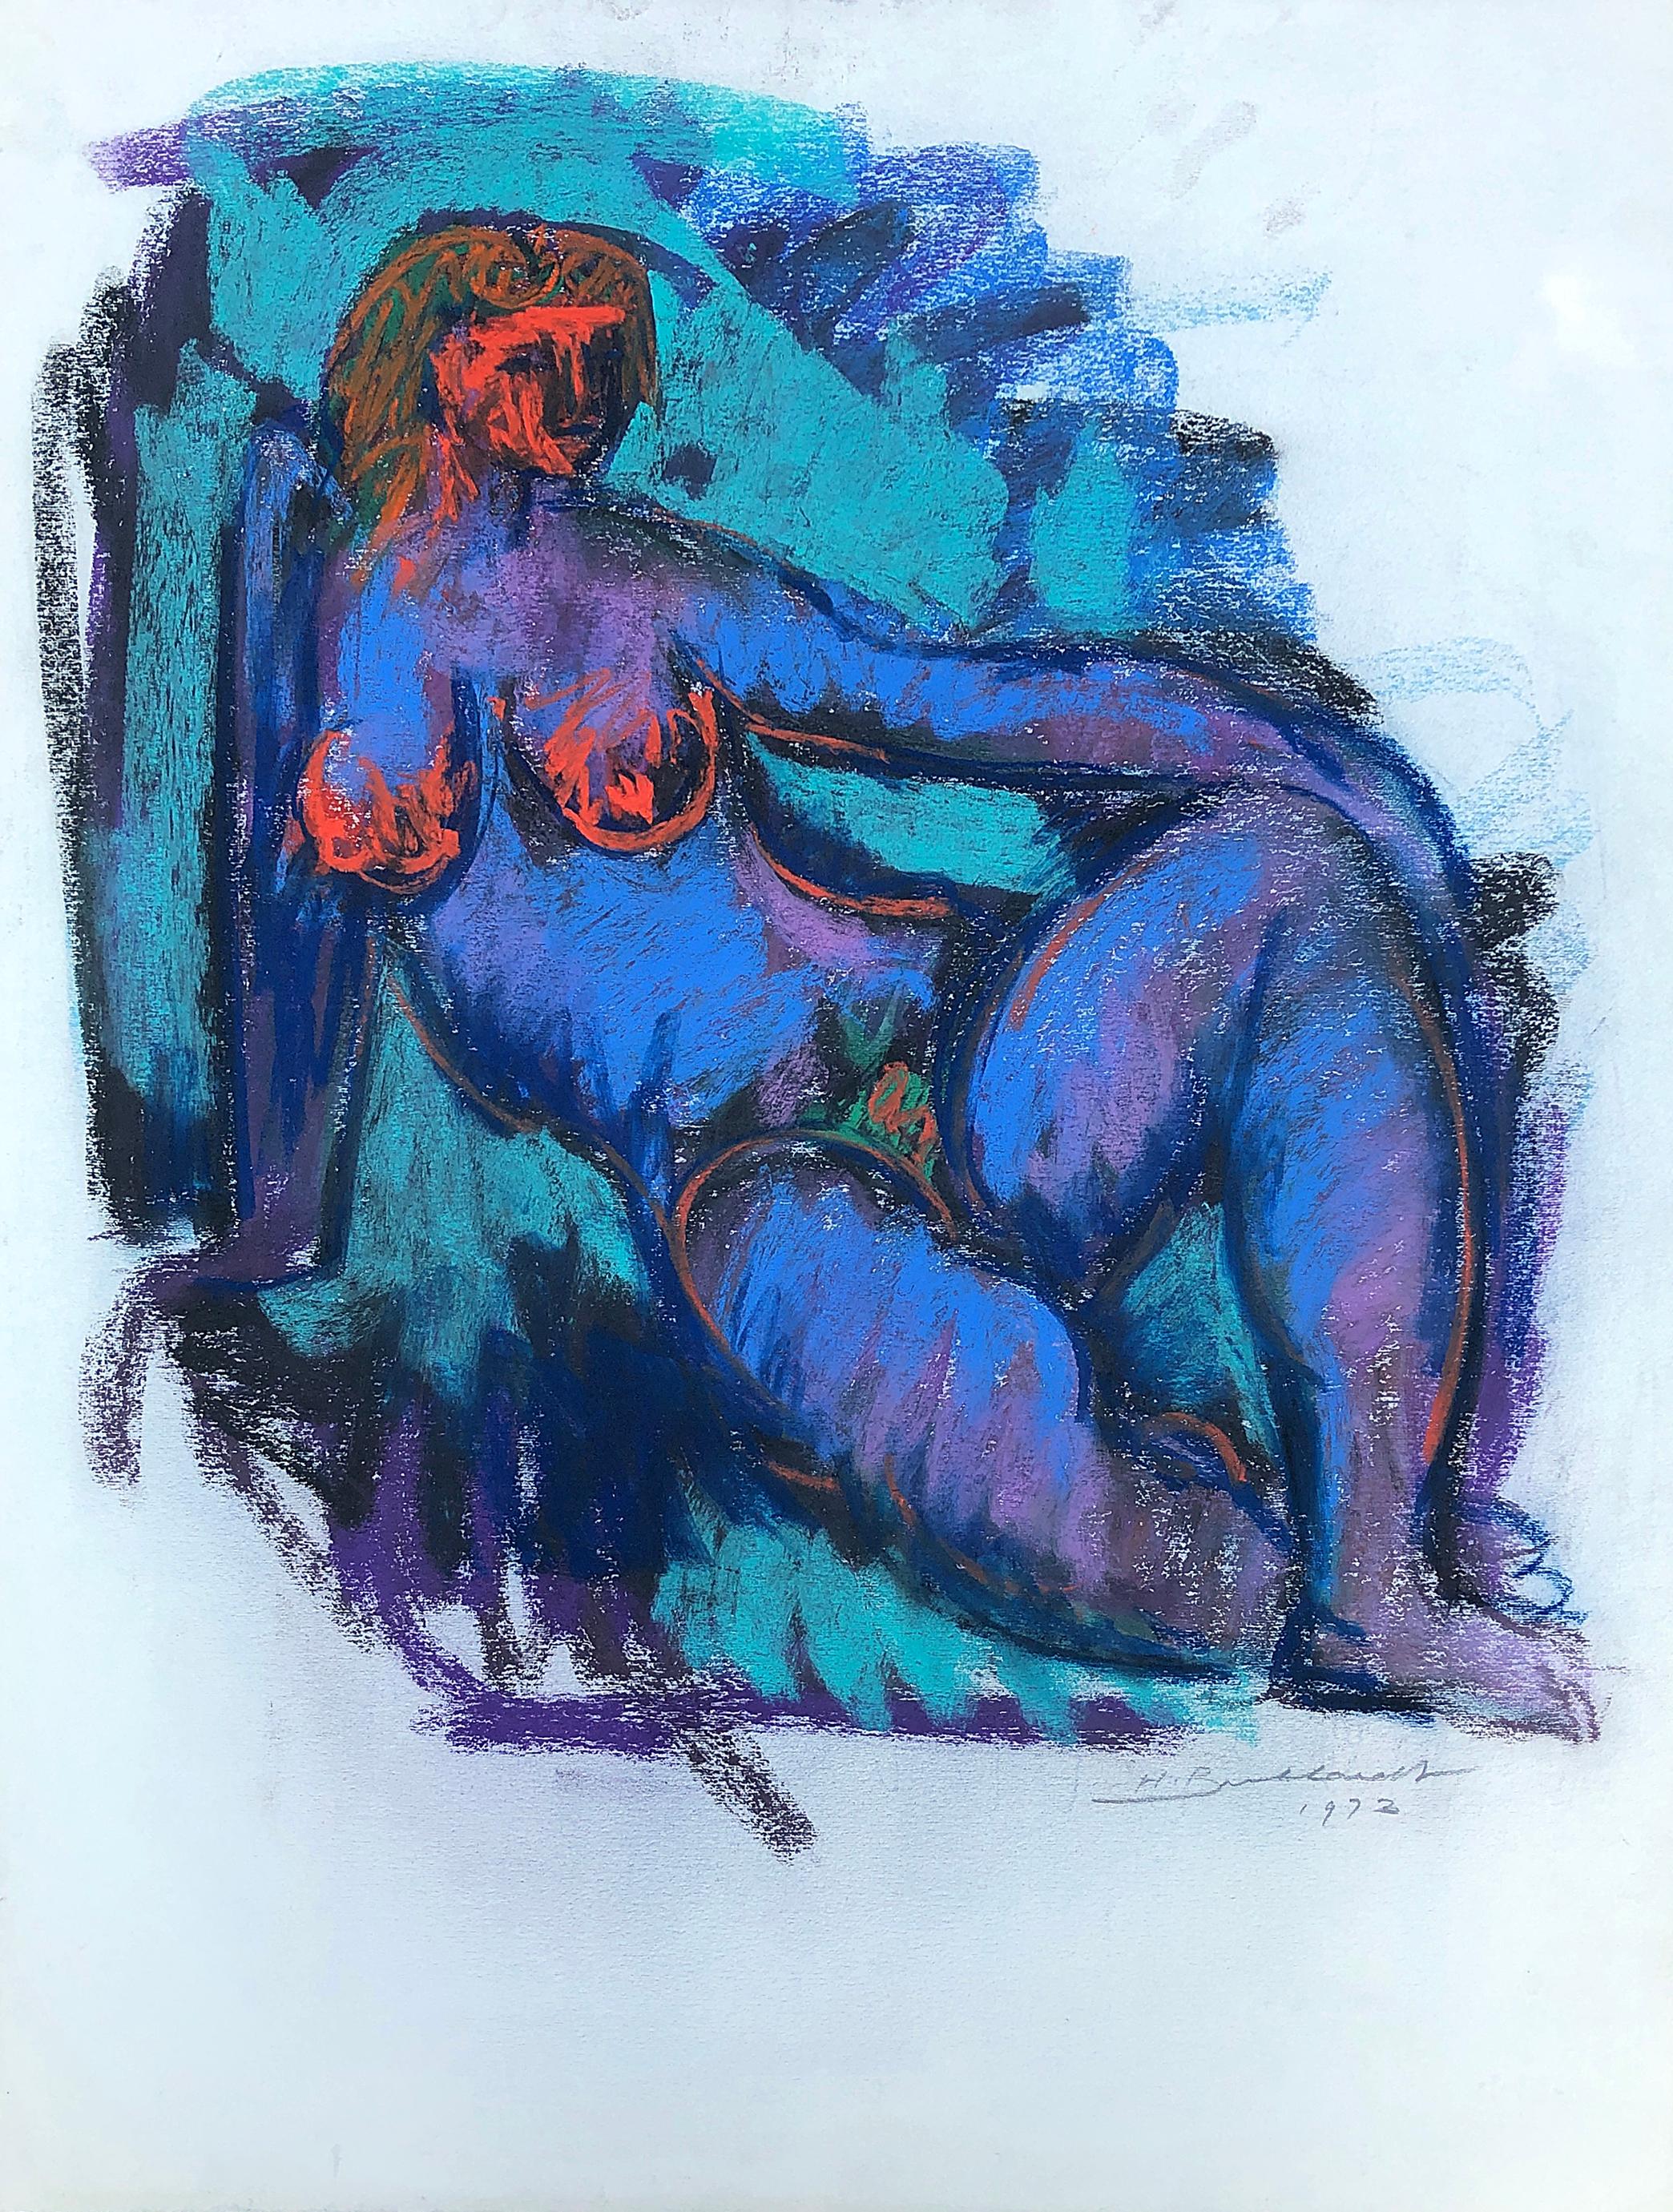 Hans Burkhardt regularly created pastels from life models, and this is a lovely example of that. He regularly maintained an interest in figural work throughout his long and diverse career. 

Untitled Nude (1972)
Pastel on paper
26" x 20" 
Signed and